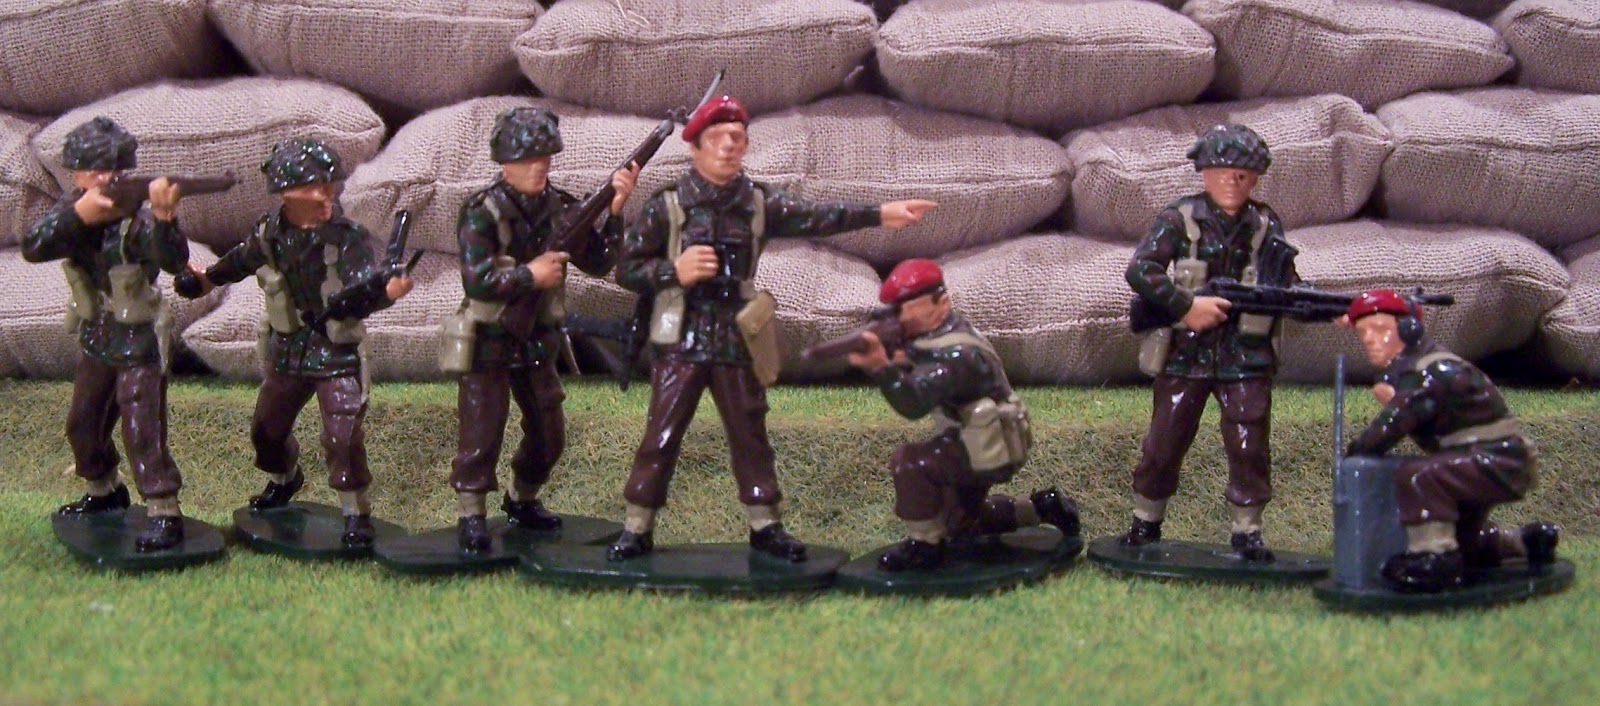 WWII Plastic Toy Soldiers: Toy Soldier Makers - 70s and 80s